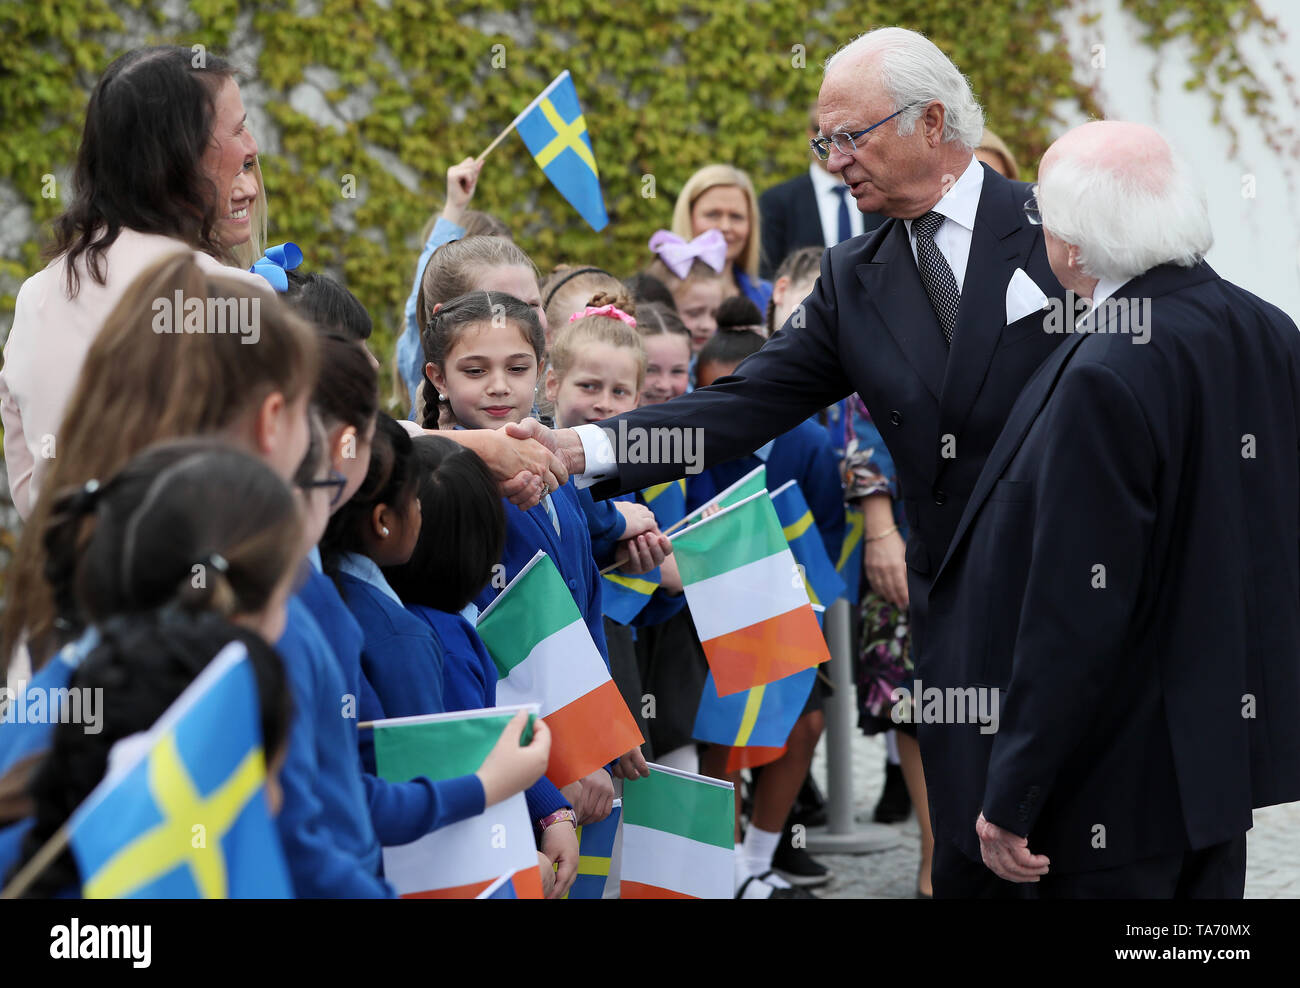 King Carl XVI Gustaf and President Michael D. Higgins with children from St. Brigid's GNS, Palmerston, at Aras an Uachtarain in Dublin during the Swedish state visit to Ireland. Stock Photo